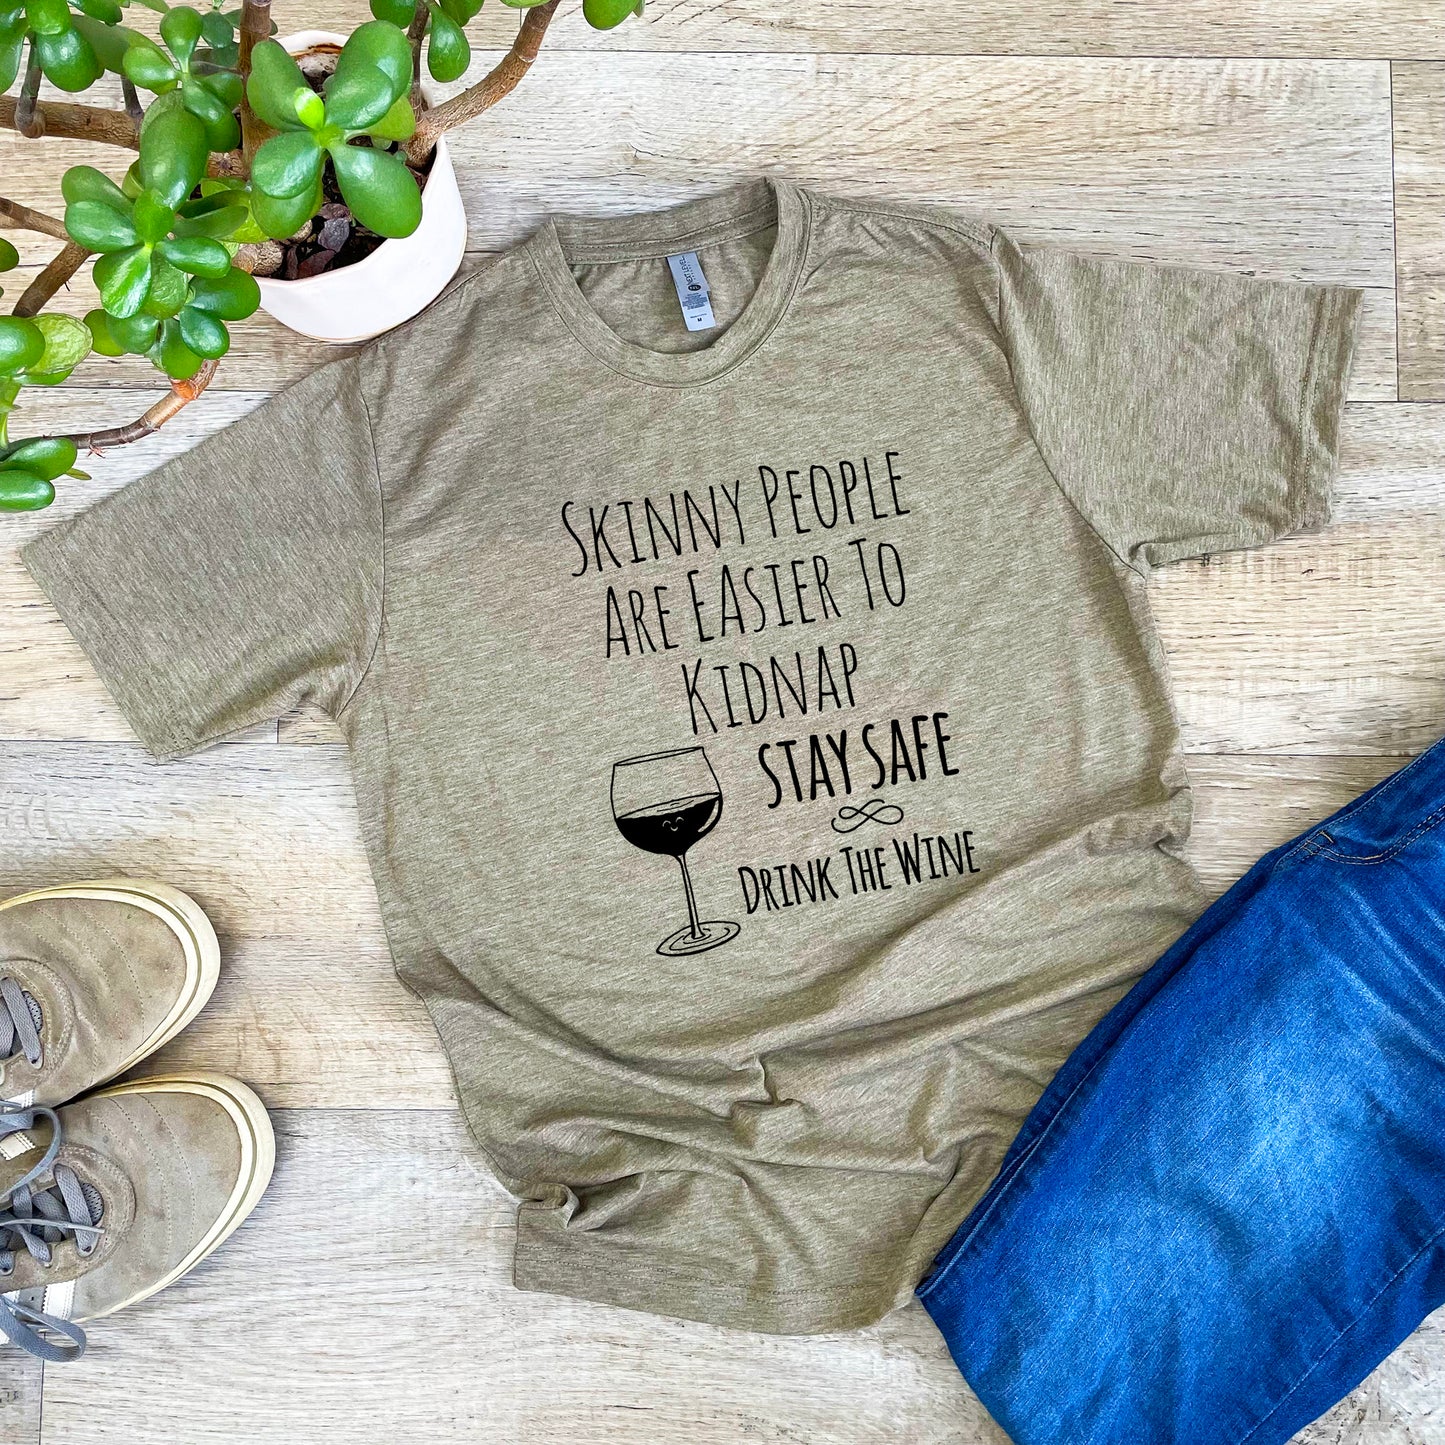 Skinny People Are Easier To Kidnap. Stay Safe. Drink The Wine - Men's / Unisex Tee - Stonewash Blue or Sage